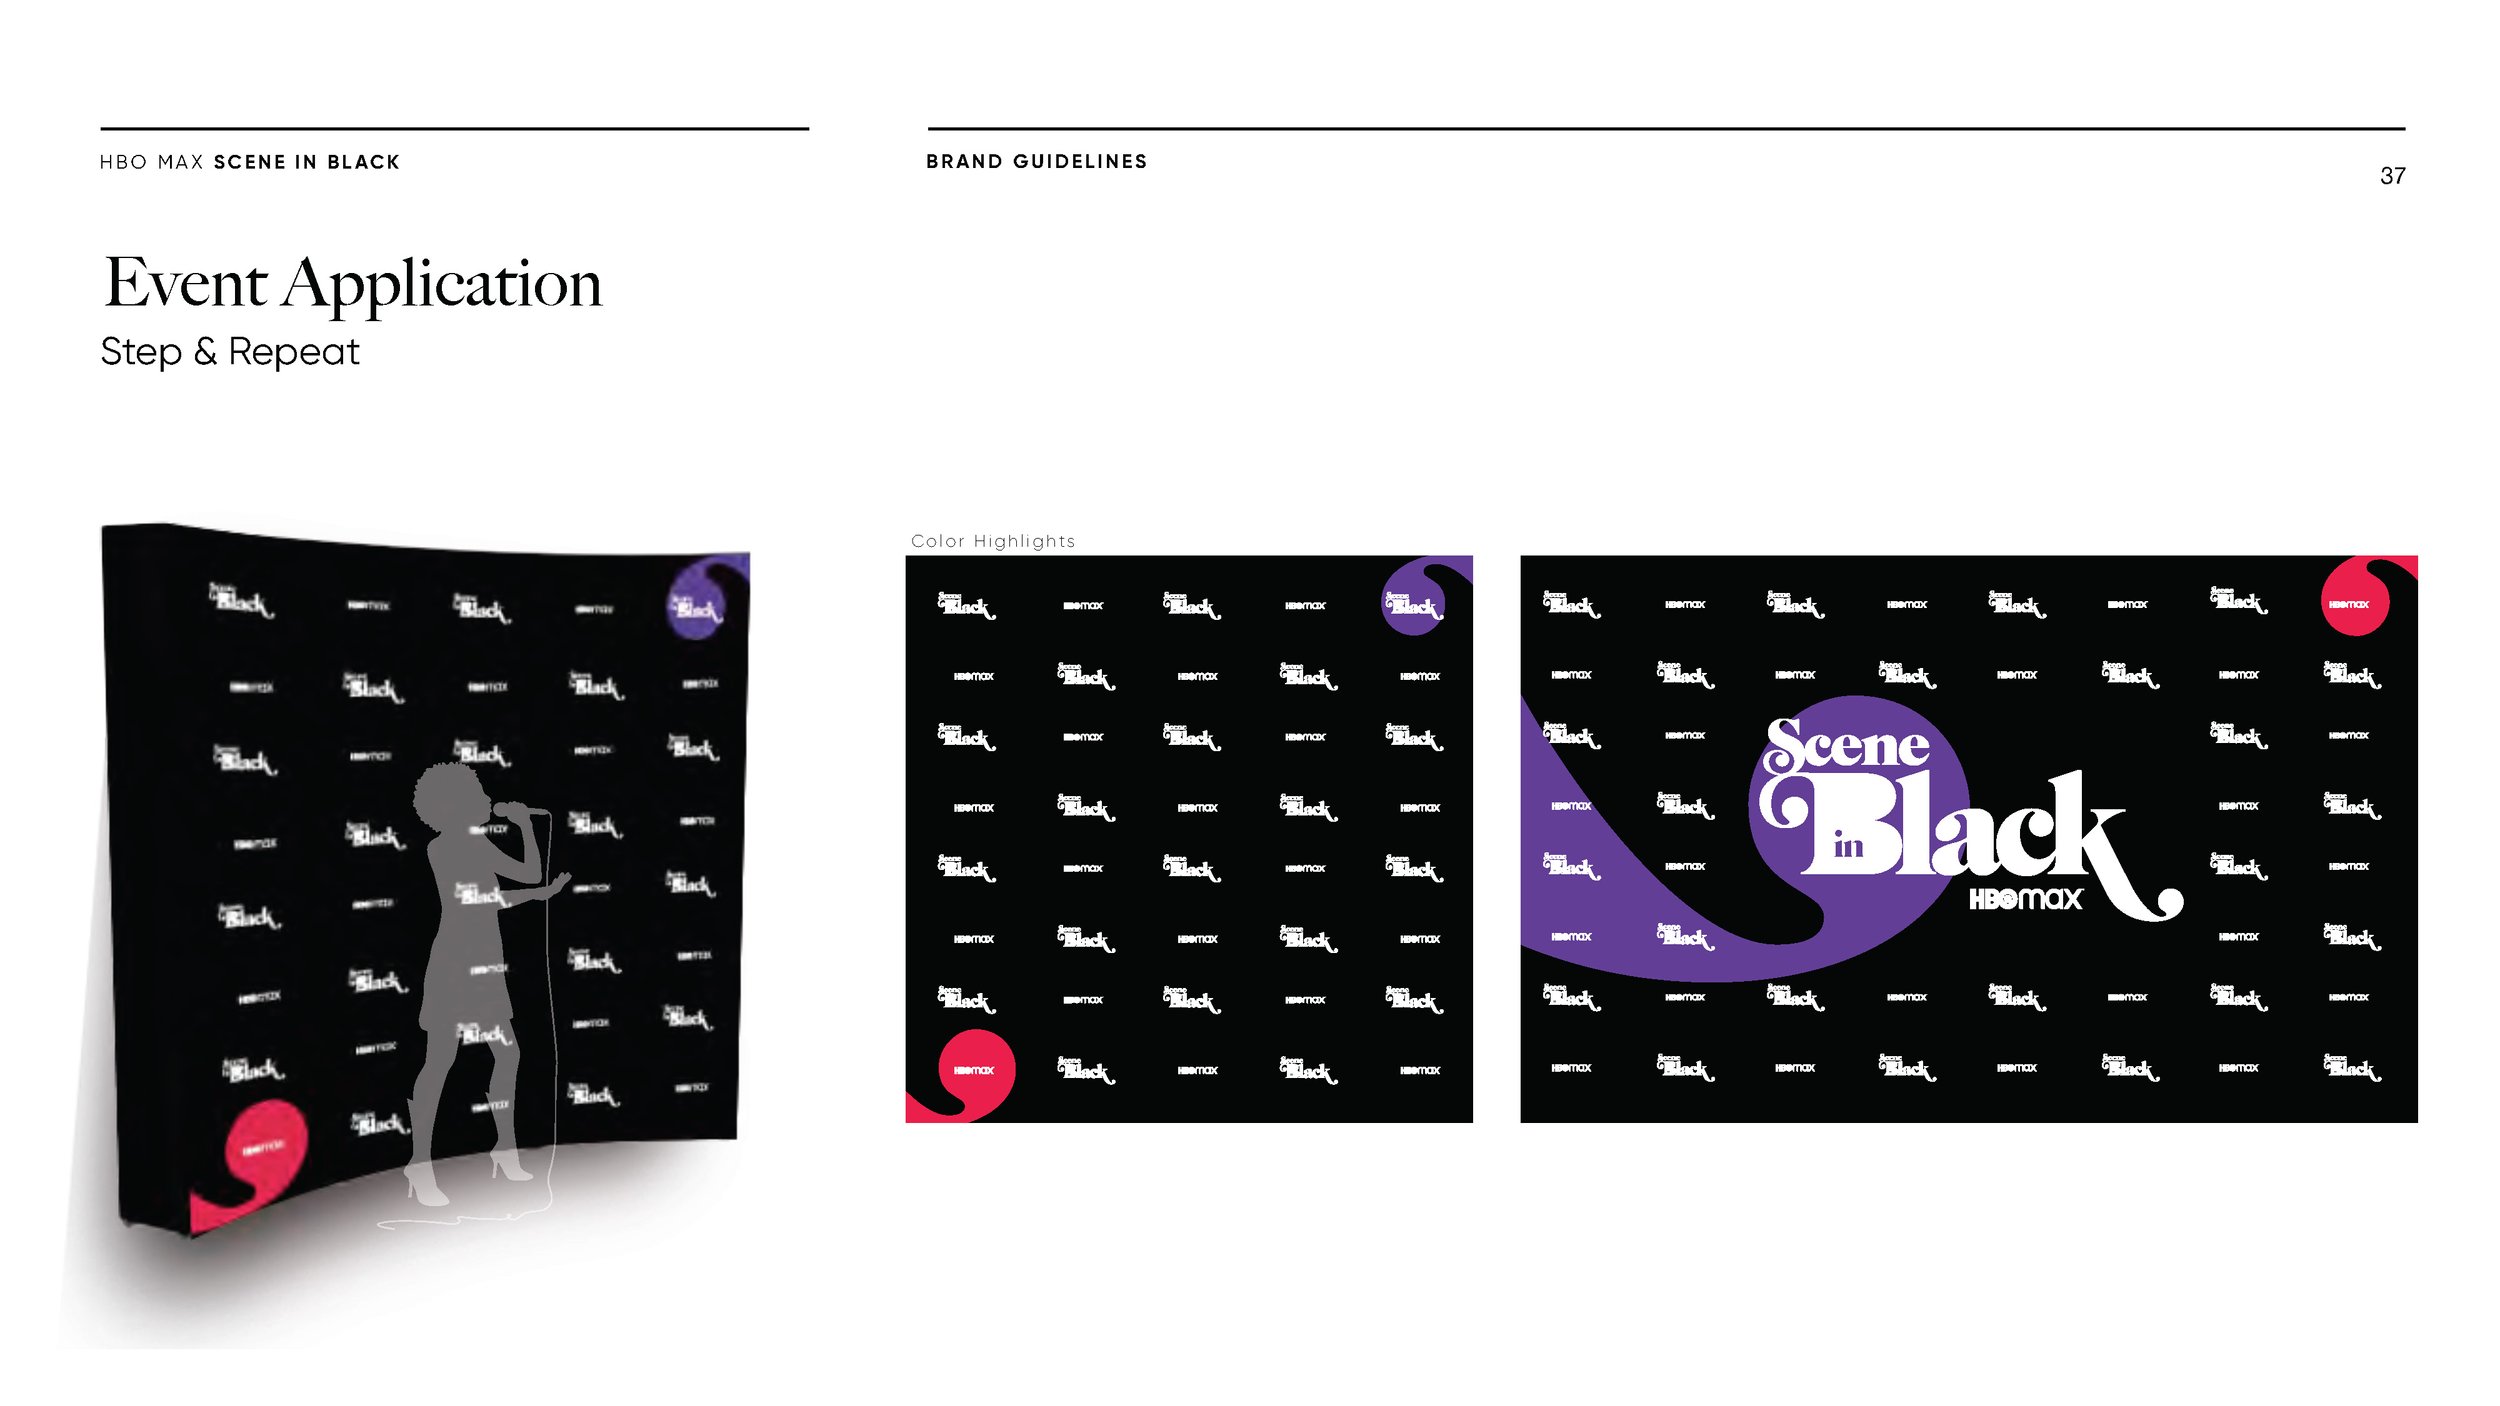 HBOMax_SceneinBlack | Brand Guidelines | Final Oct21_Page_37.jpg